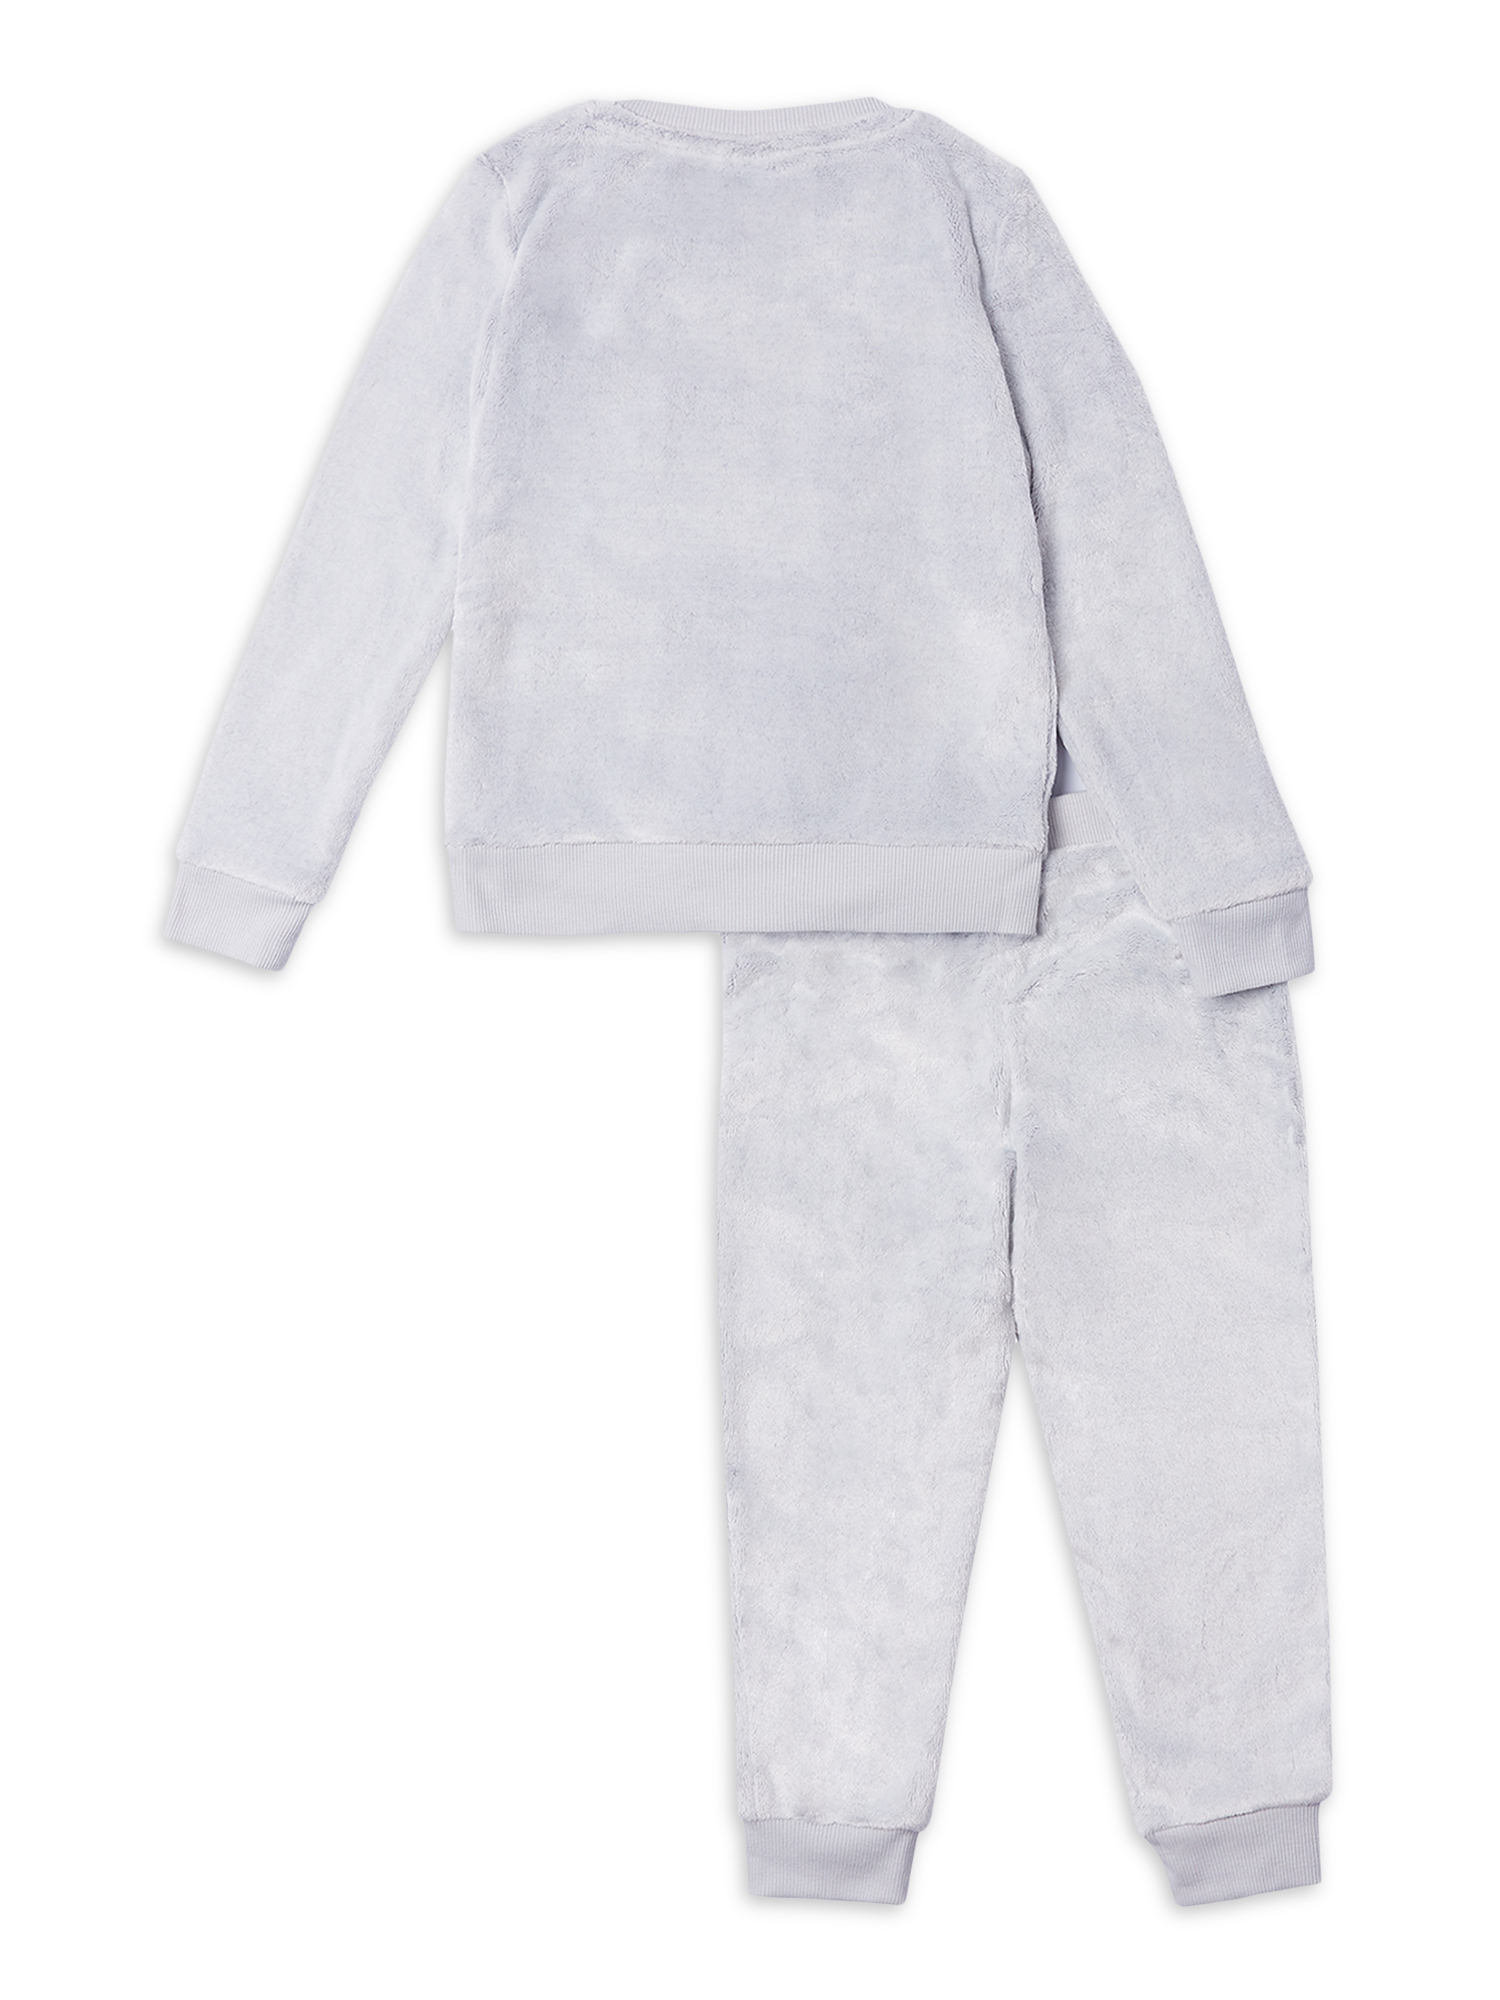 Wonder Nation Toddler and Baby Girl Minky Jogger Outfit Set, 2-Piece, Sizes 0/3M-5T - image 3 of 3